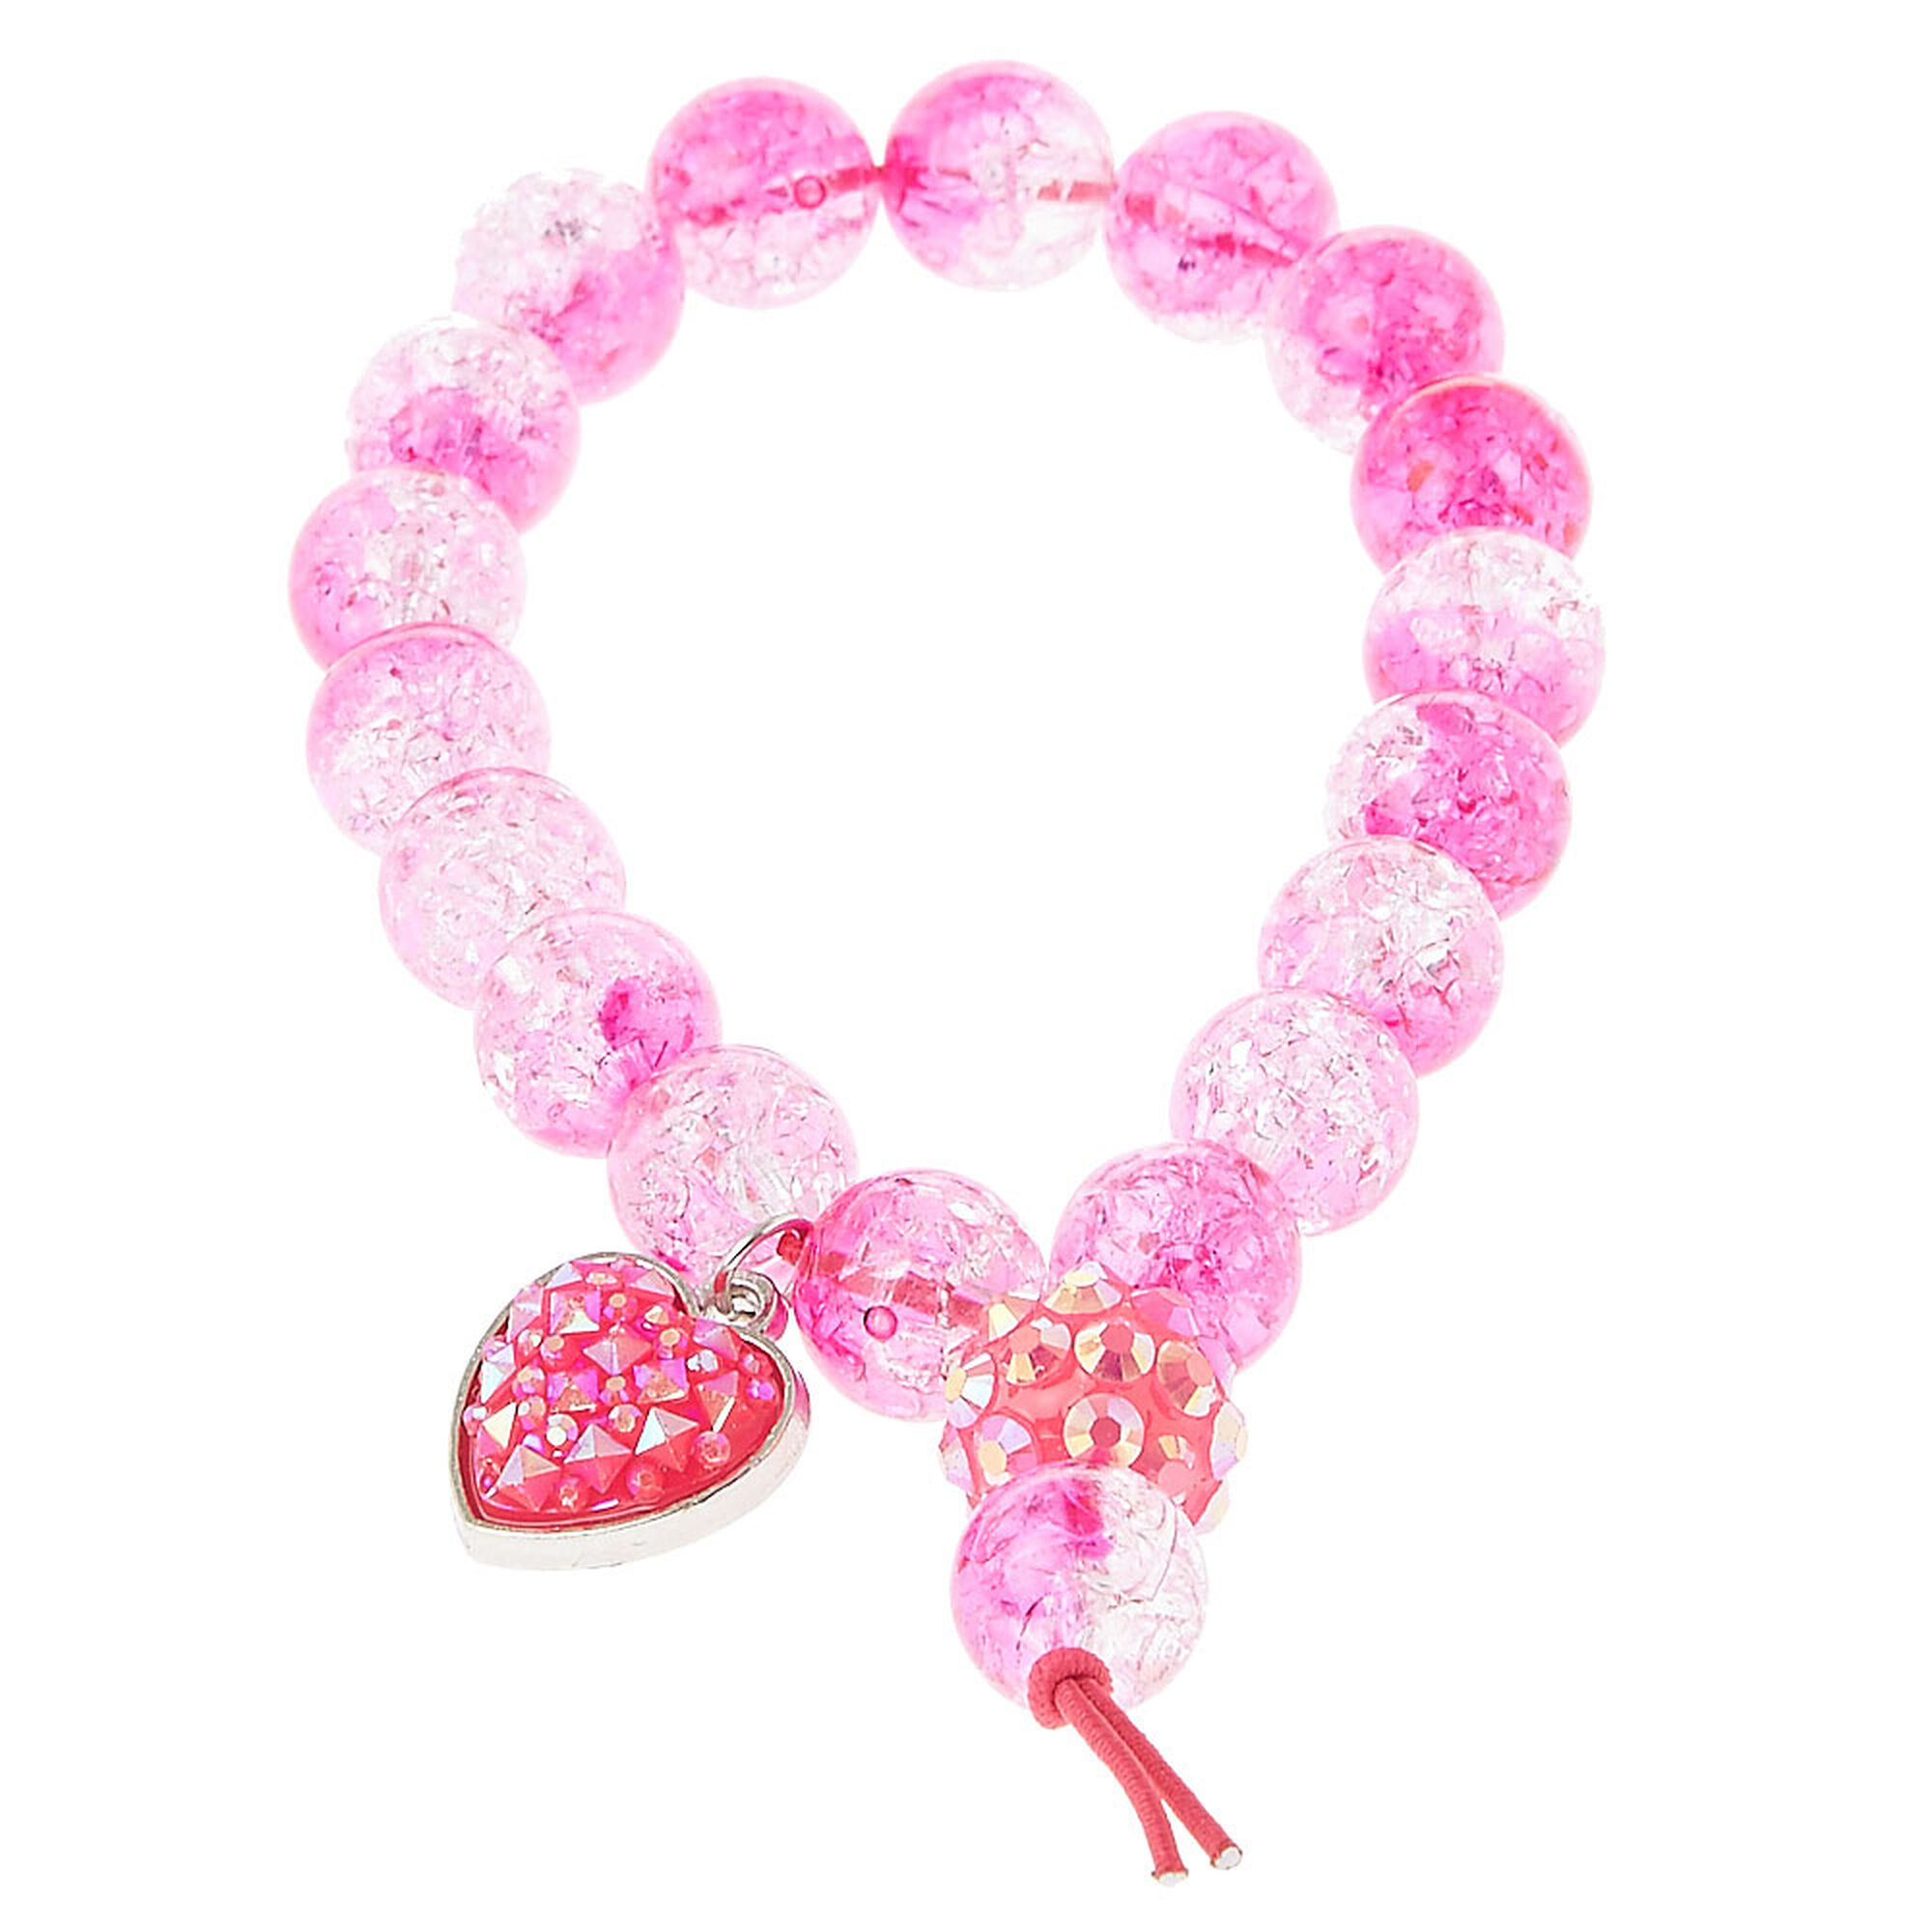 TM EVESCITY Pink Flower CZ Crystal Spacer Charm Beads for Bracelets 